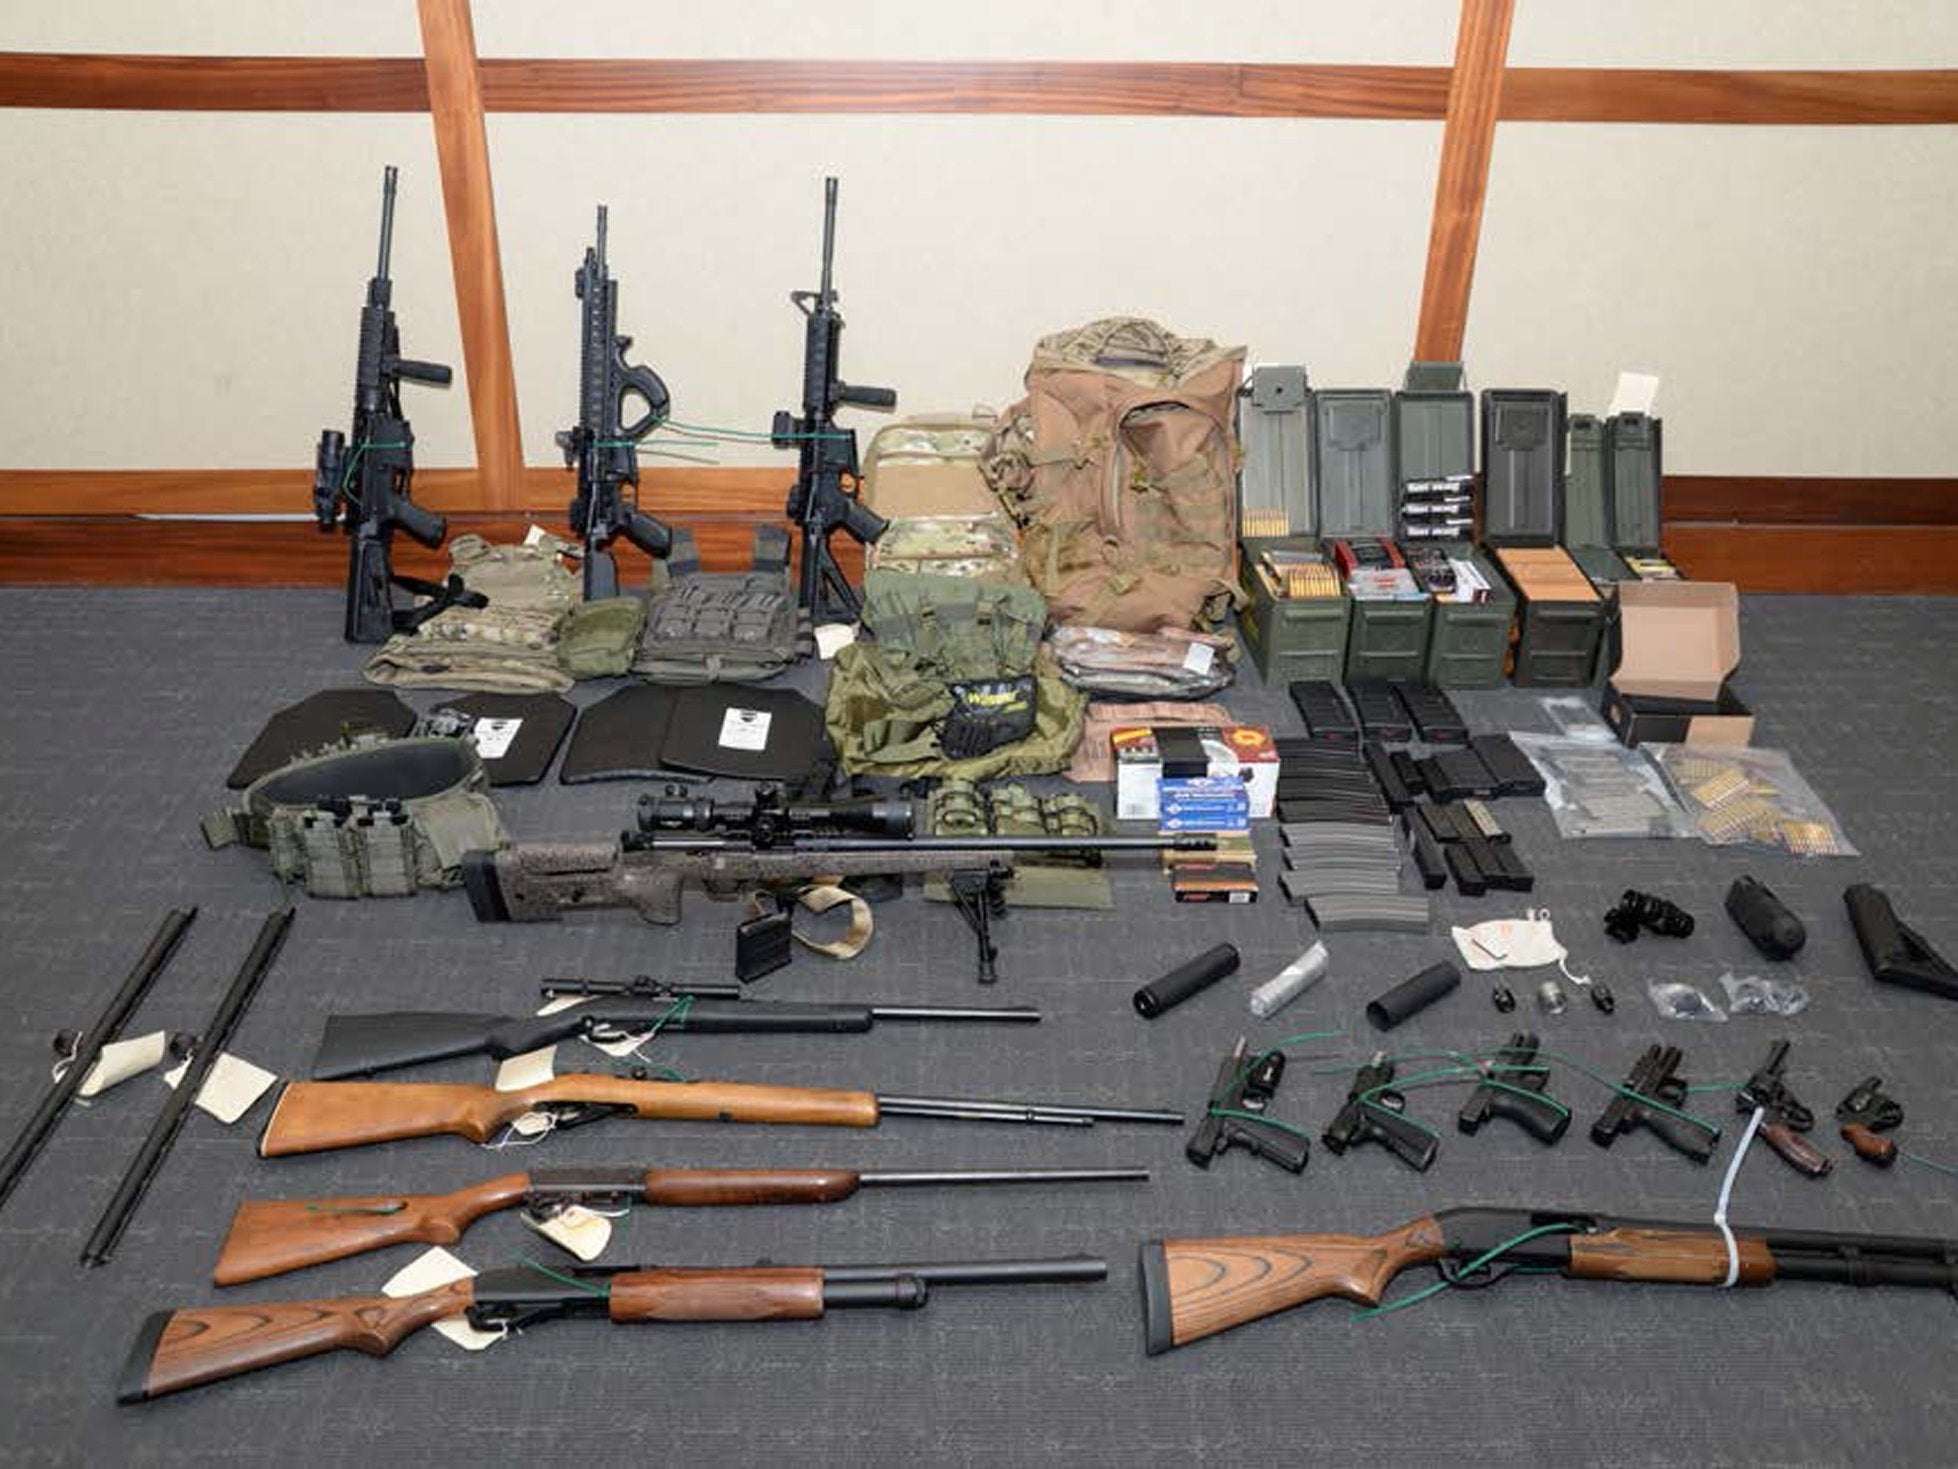 A cache of weapons found in the home of Christopher Hasson